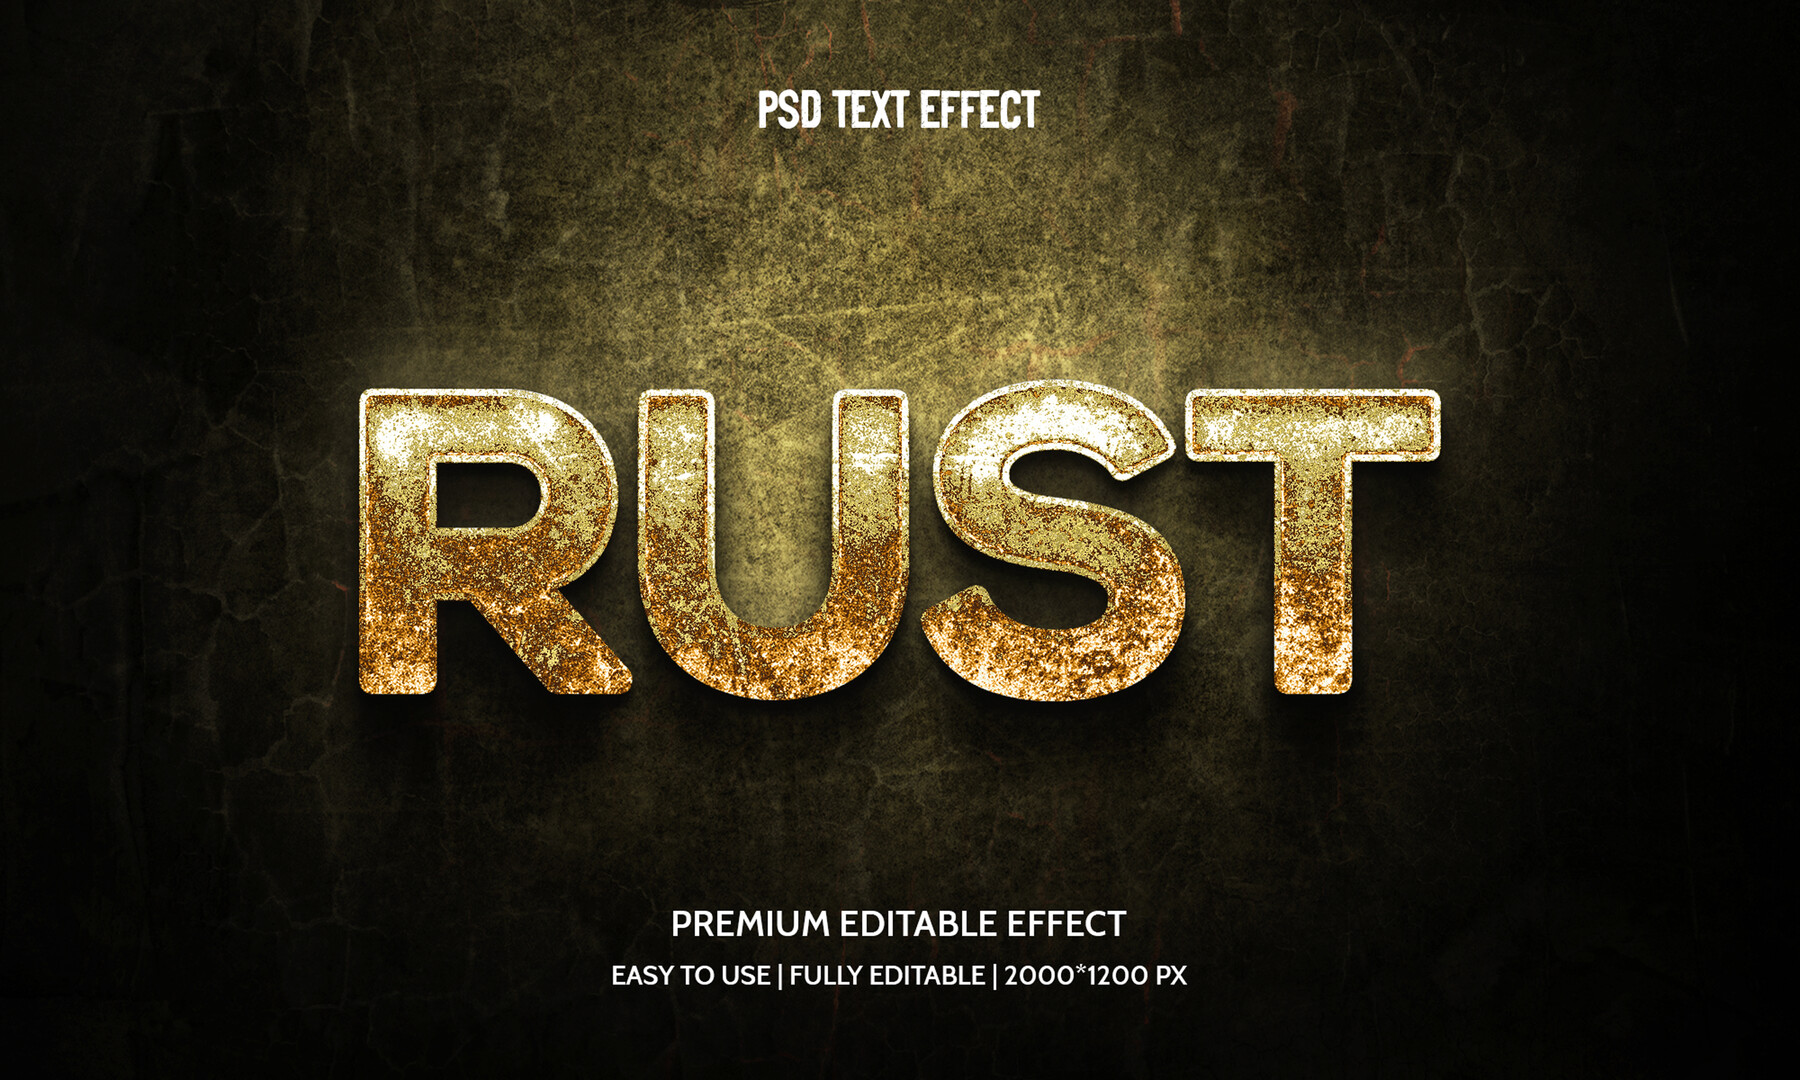 Carnival of rust text фото 50